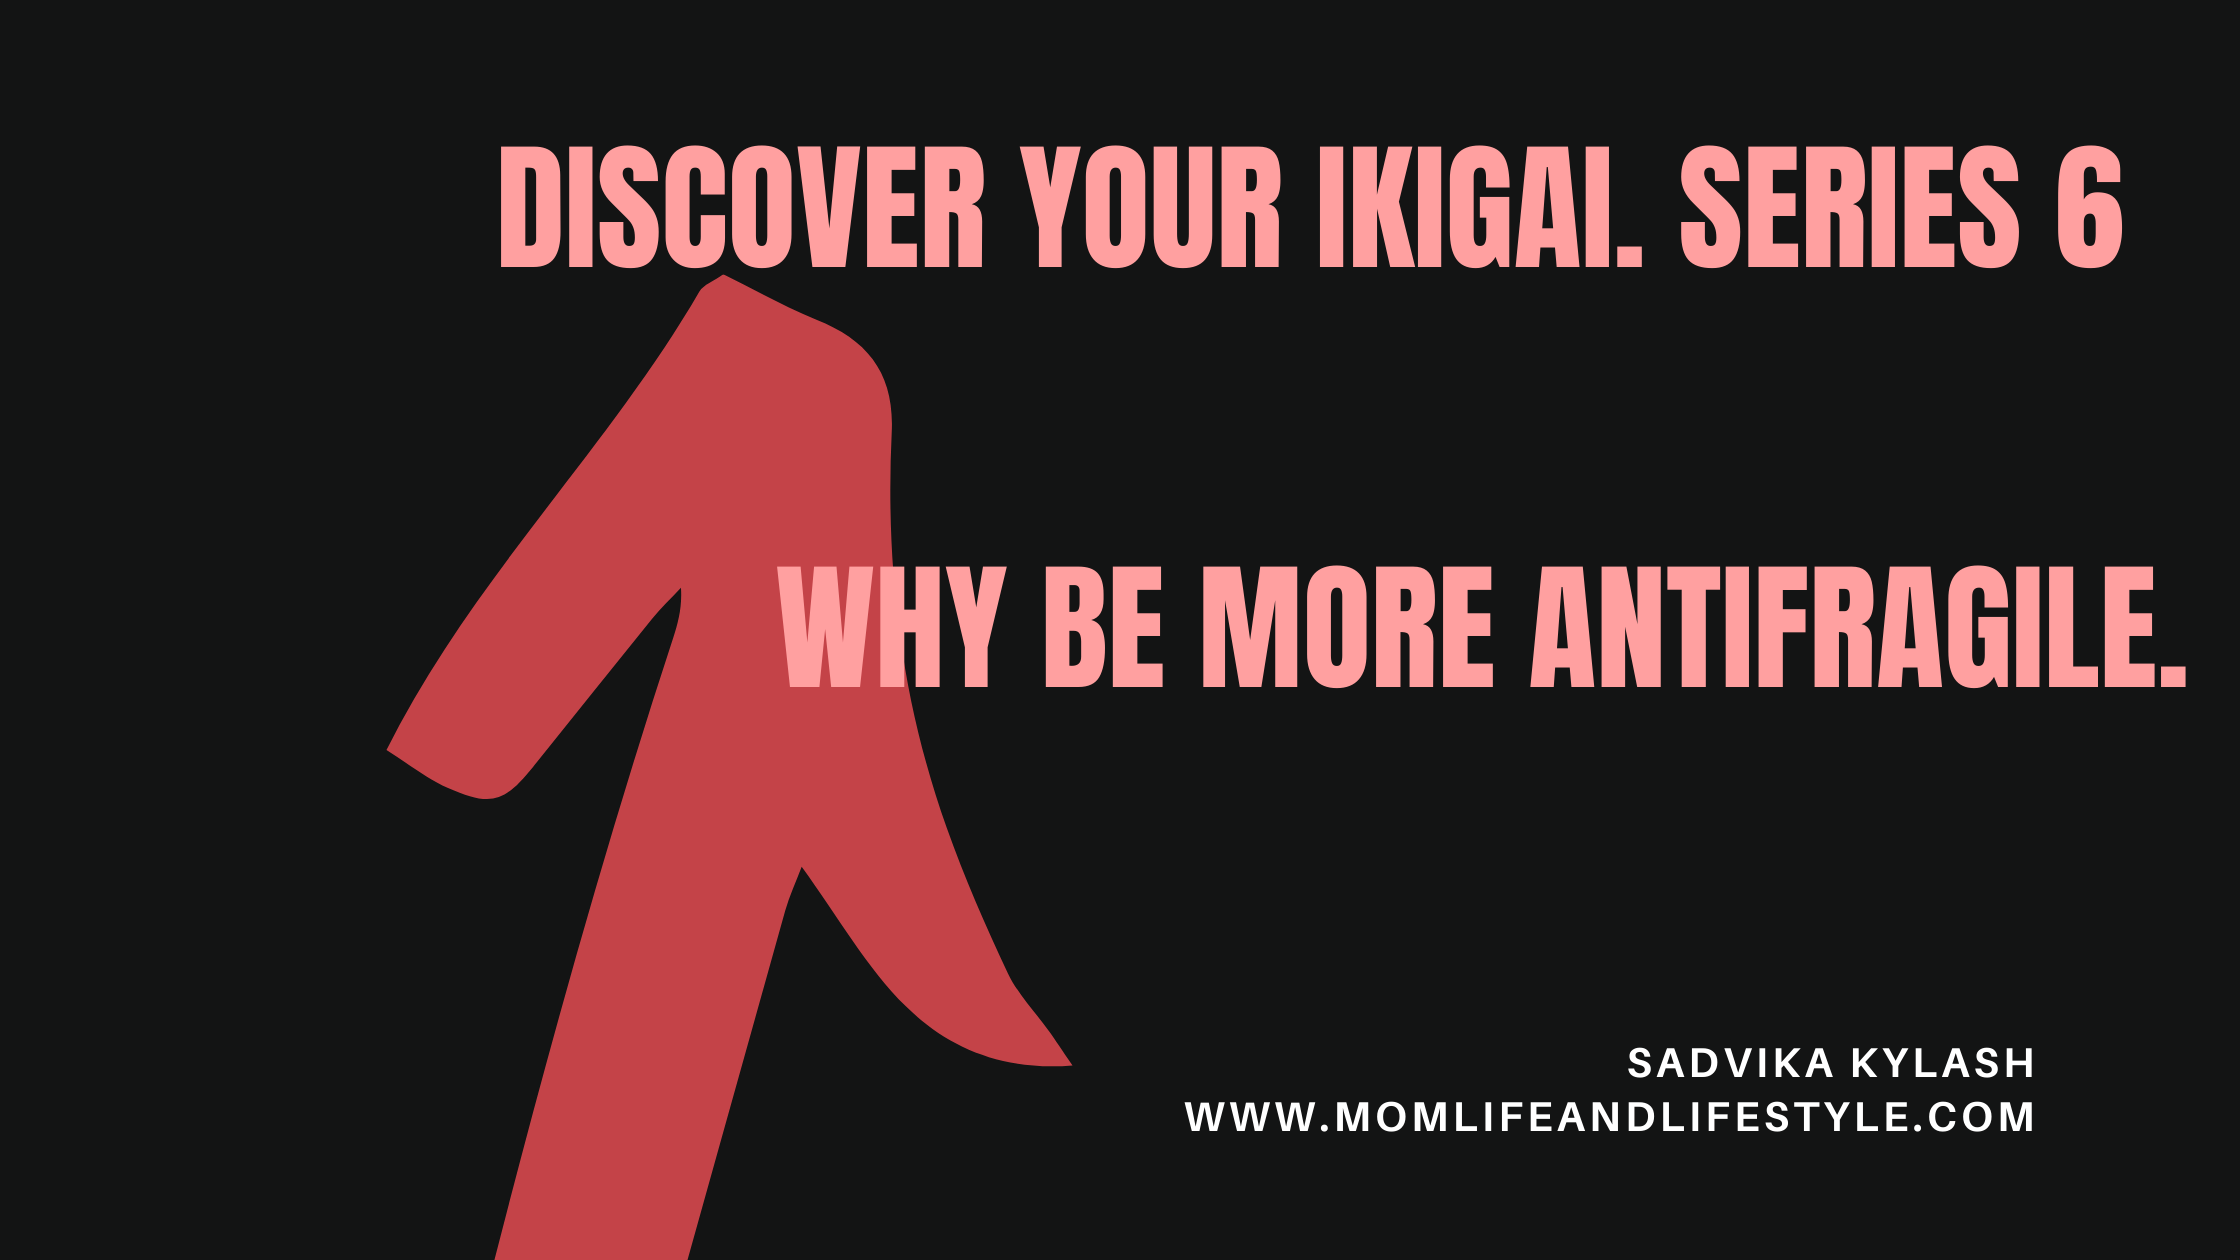 Discover your Ikigai. Series 6. Why be more Antifragile.